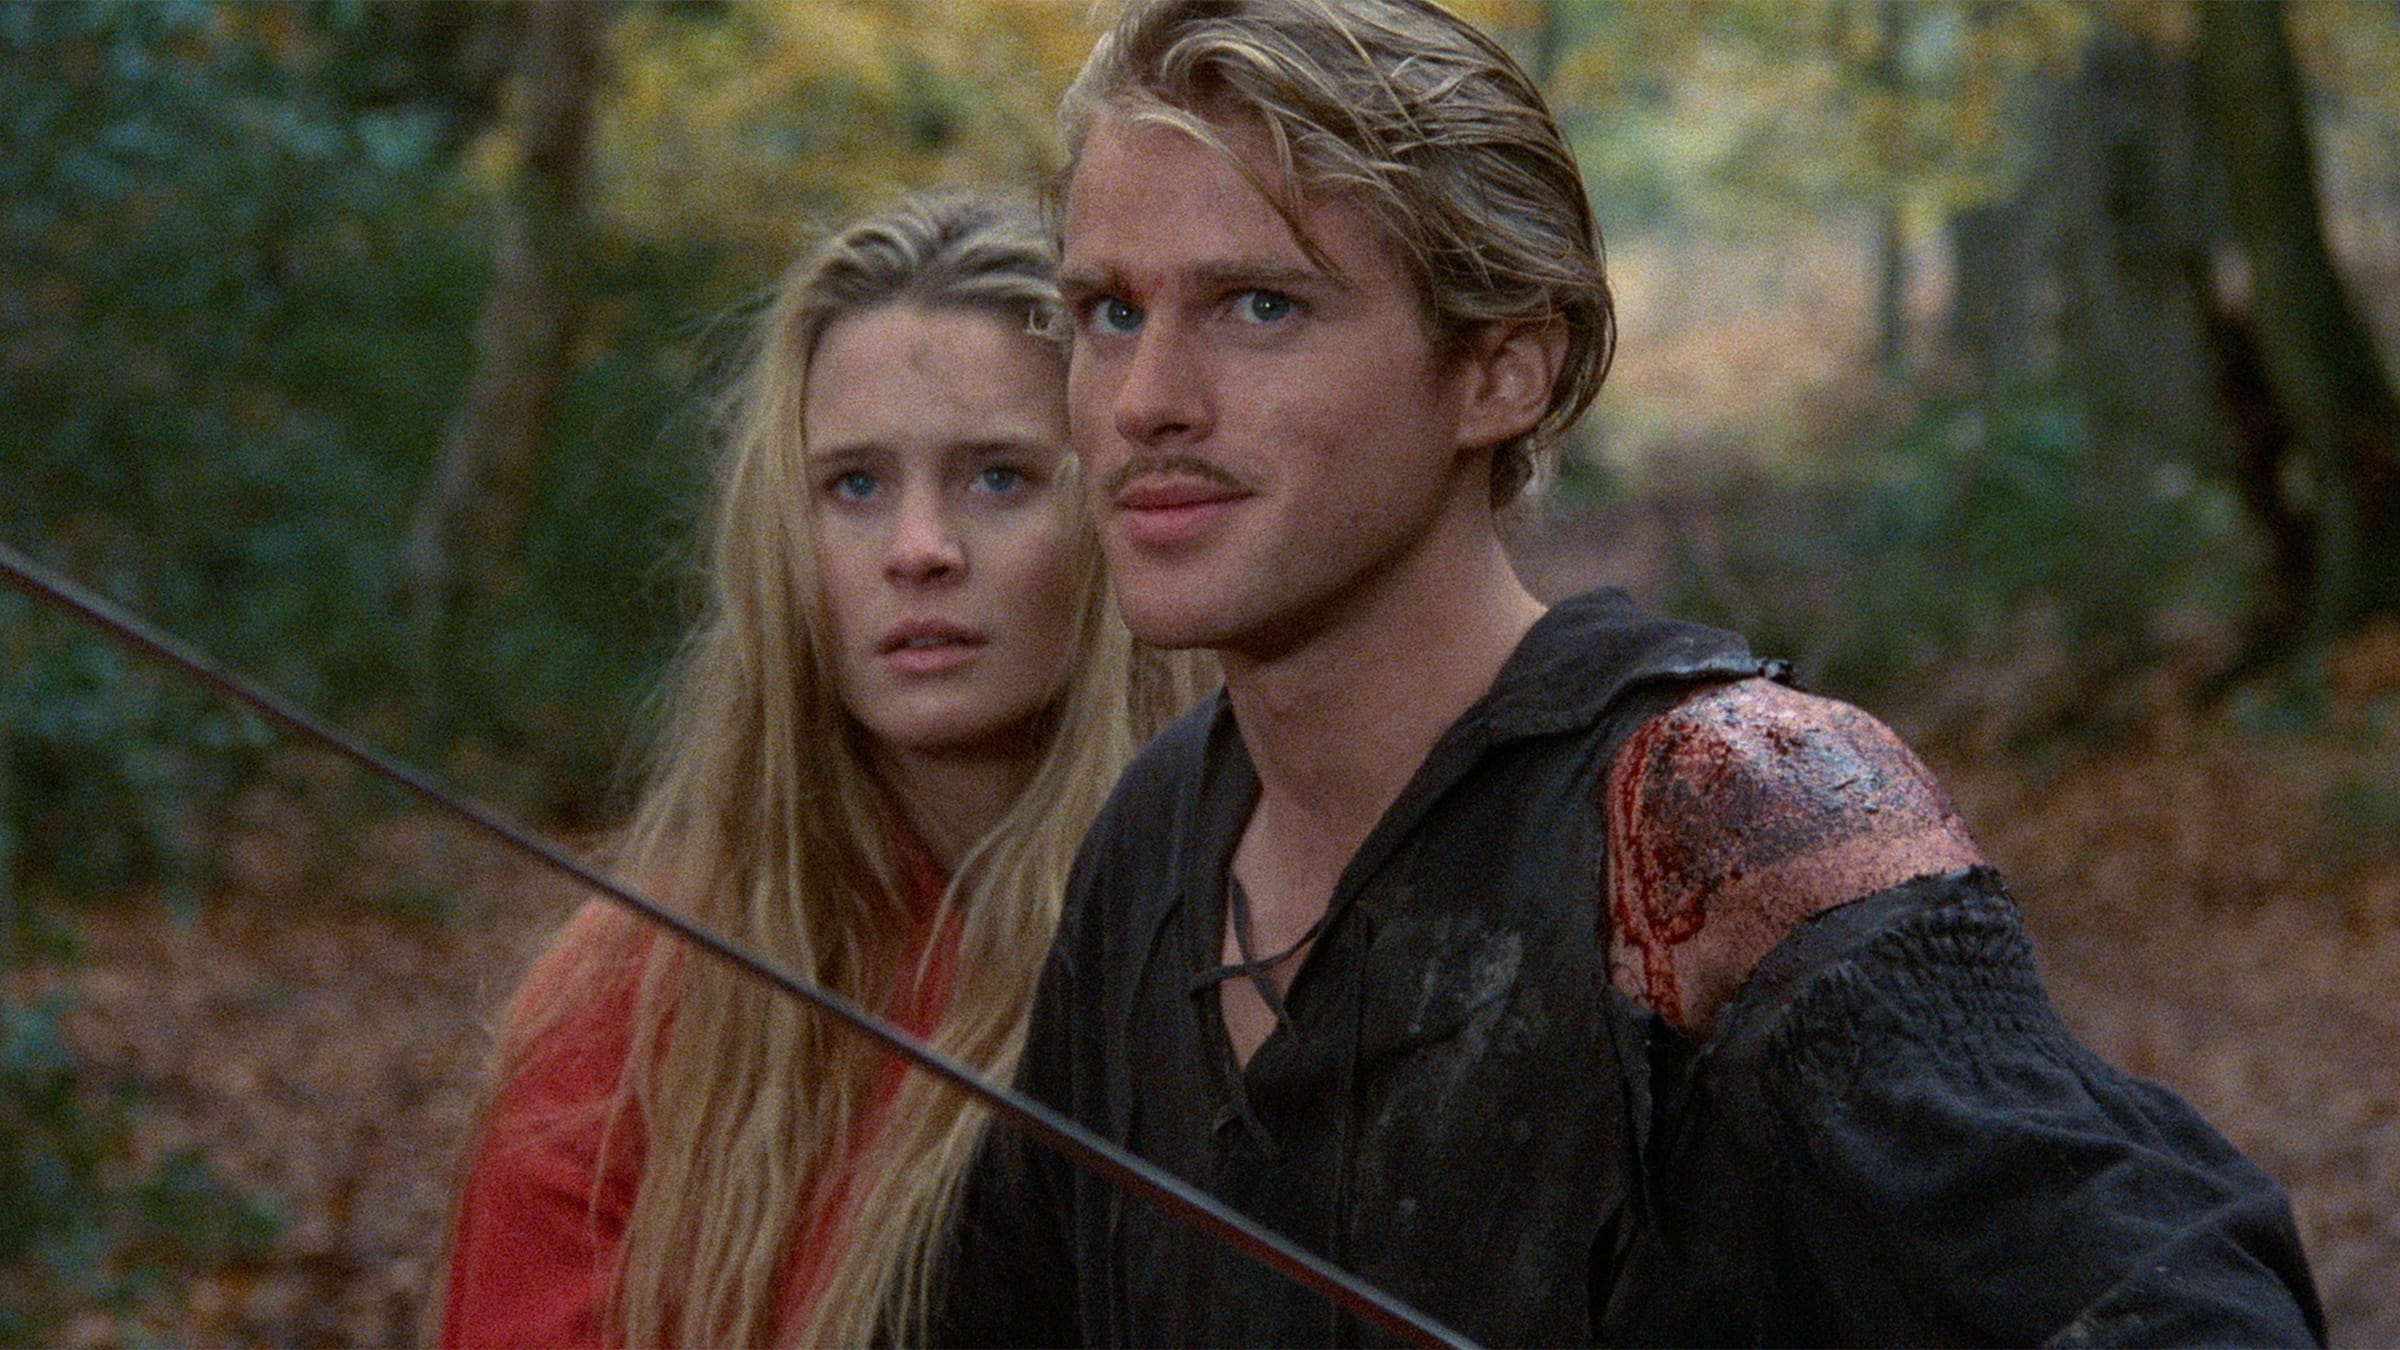 12 Things the Princess Bride Taught Me About Interior Design & The Commercial Furniture Industry